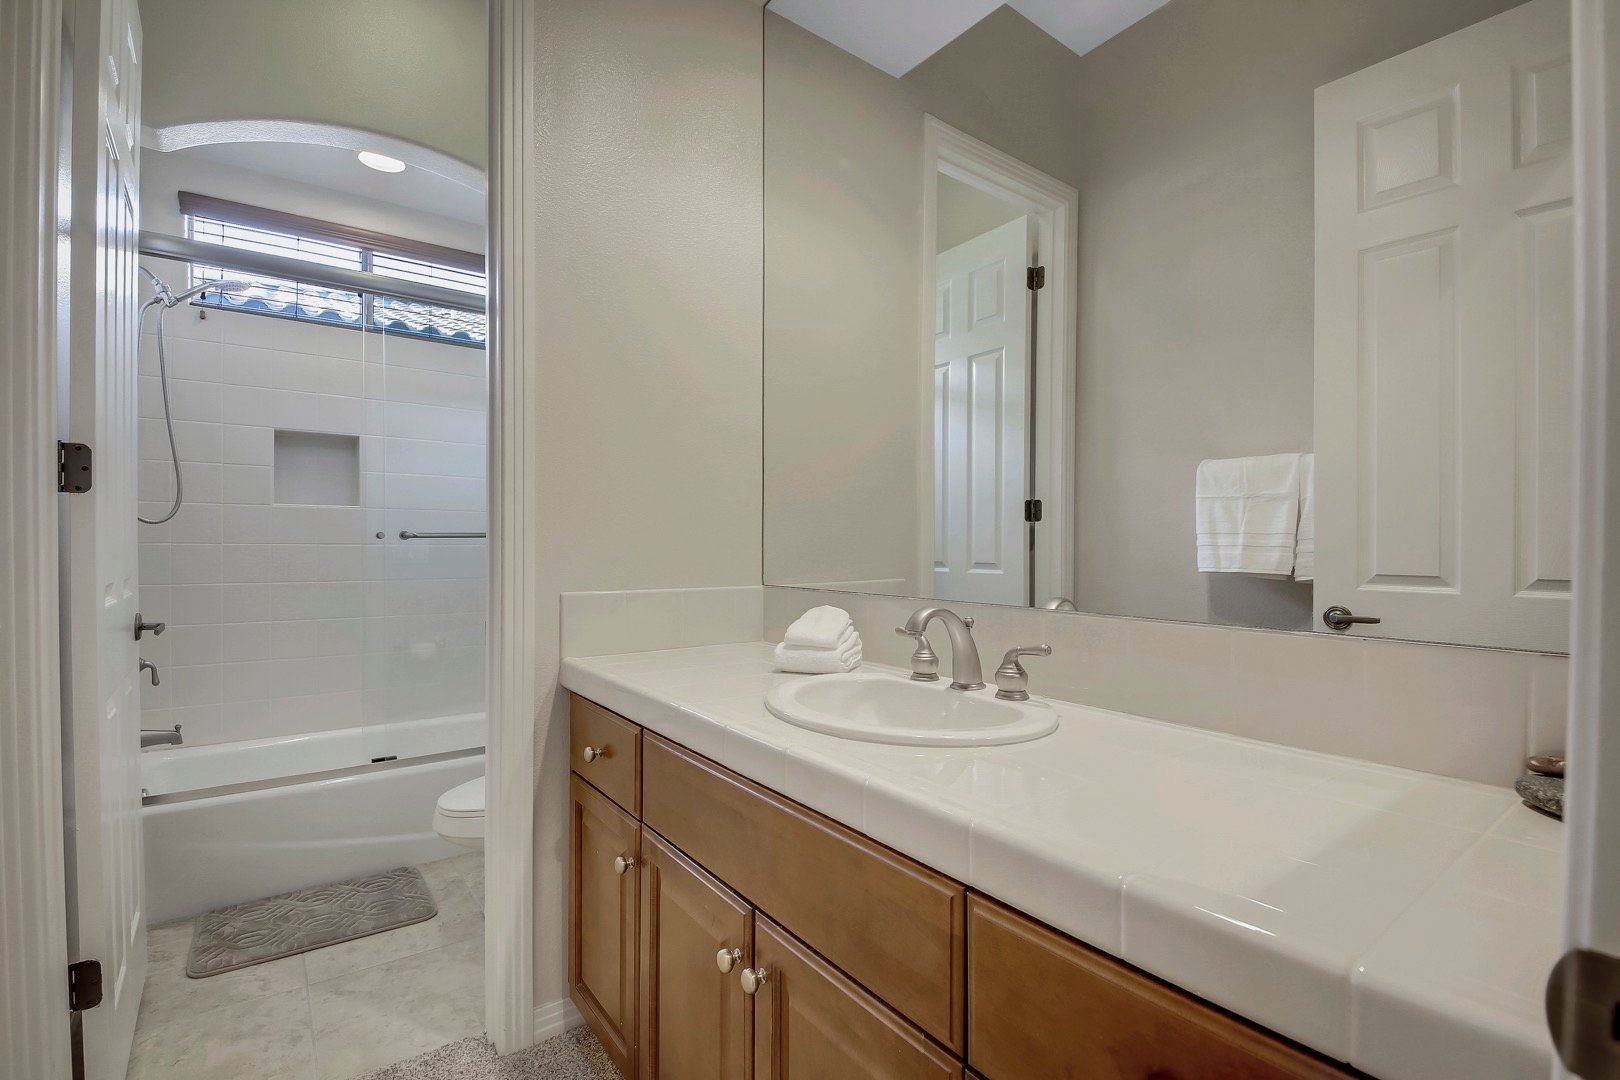 The hallway bathroom is located next to Suite 2 and features a combo shower/tub.